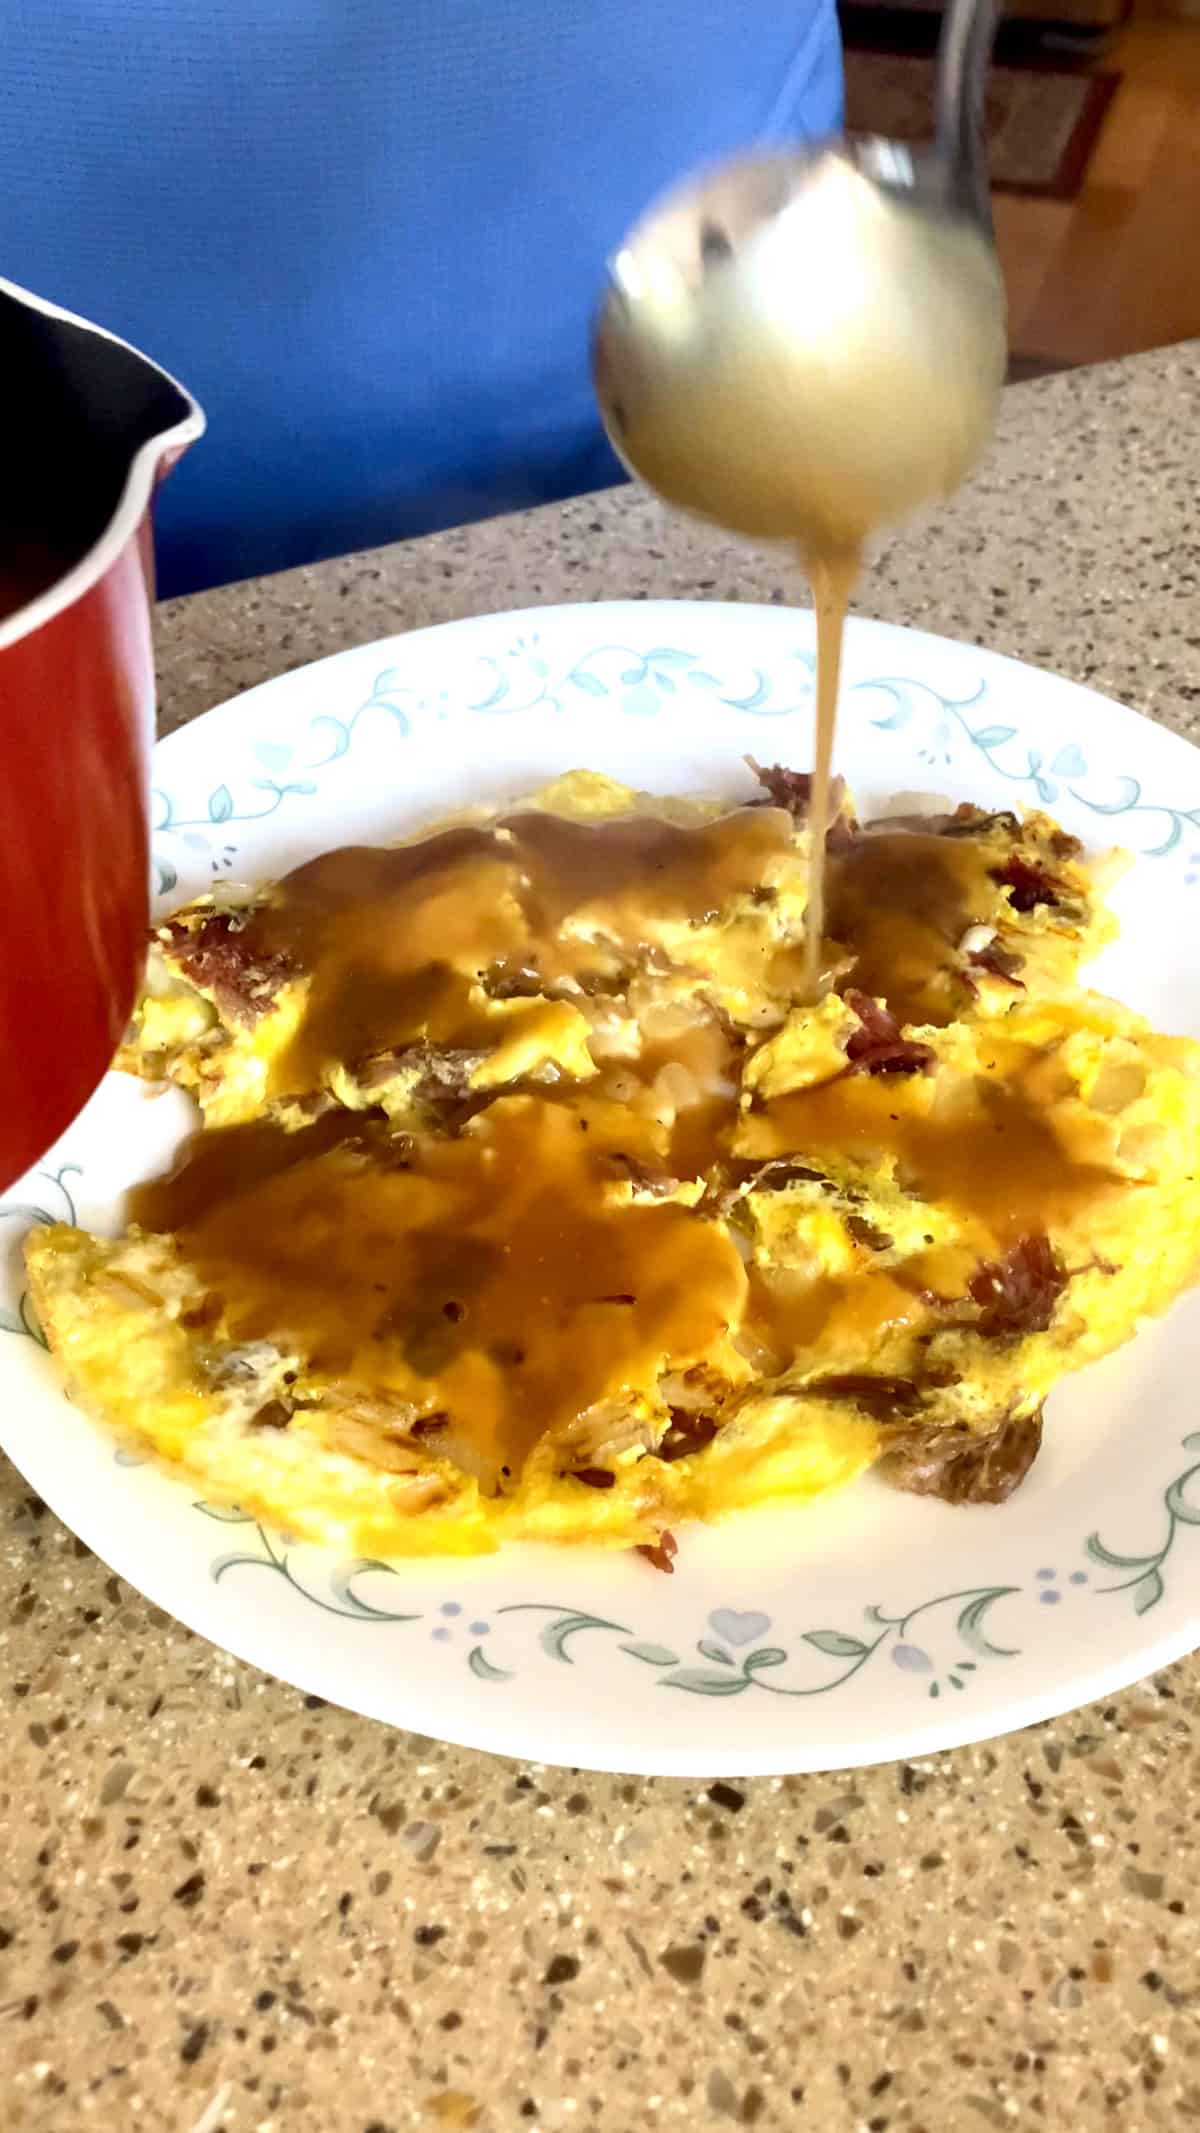 Egg omelette with pulled pork, topped with gravy